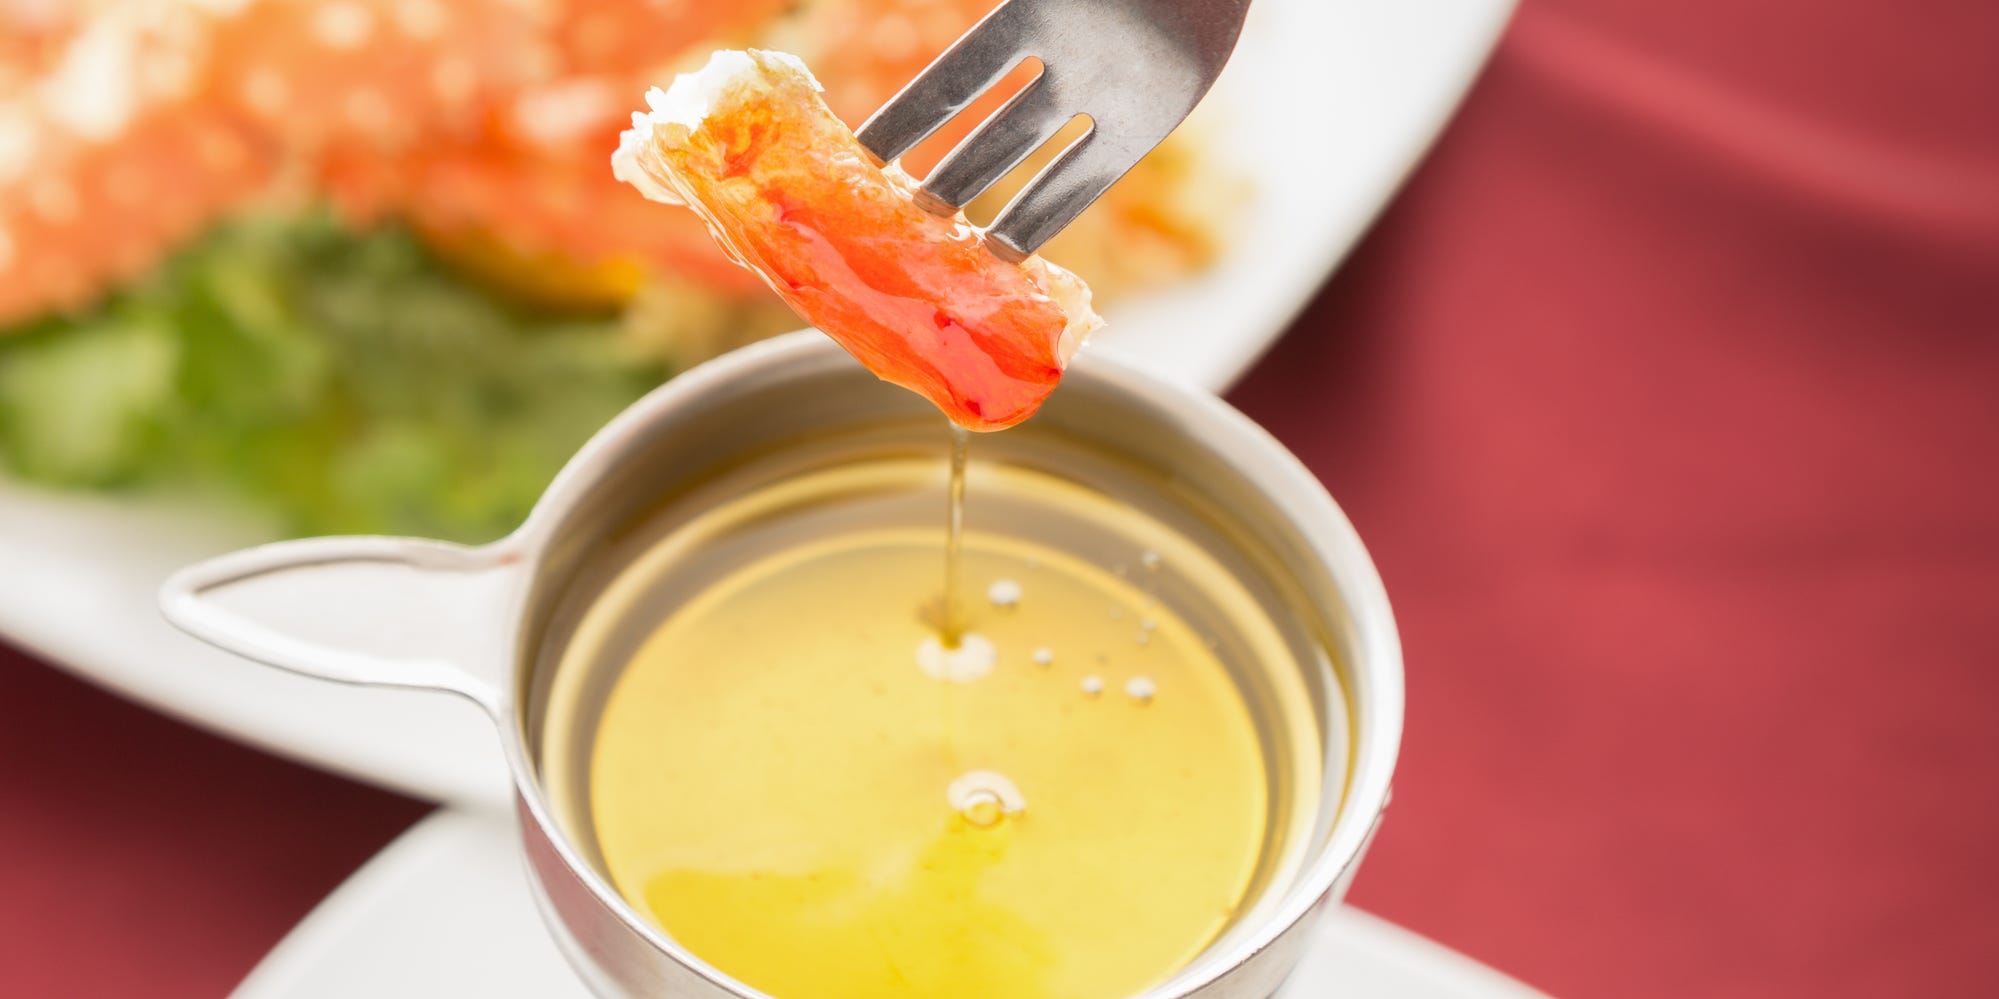 Crab dipped in clarified butter.